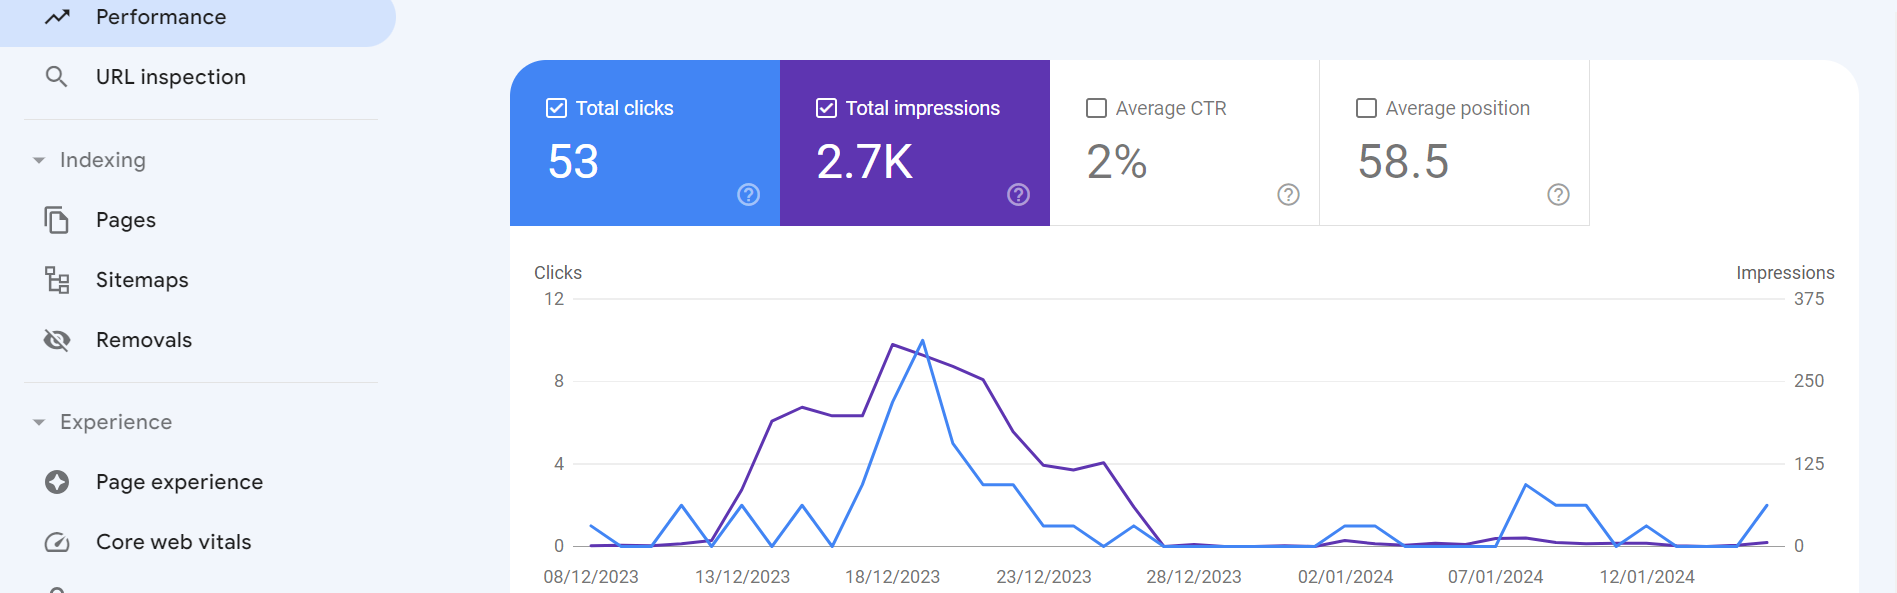 In Google Search Console Tracking Keyword Rankings for SEO Success